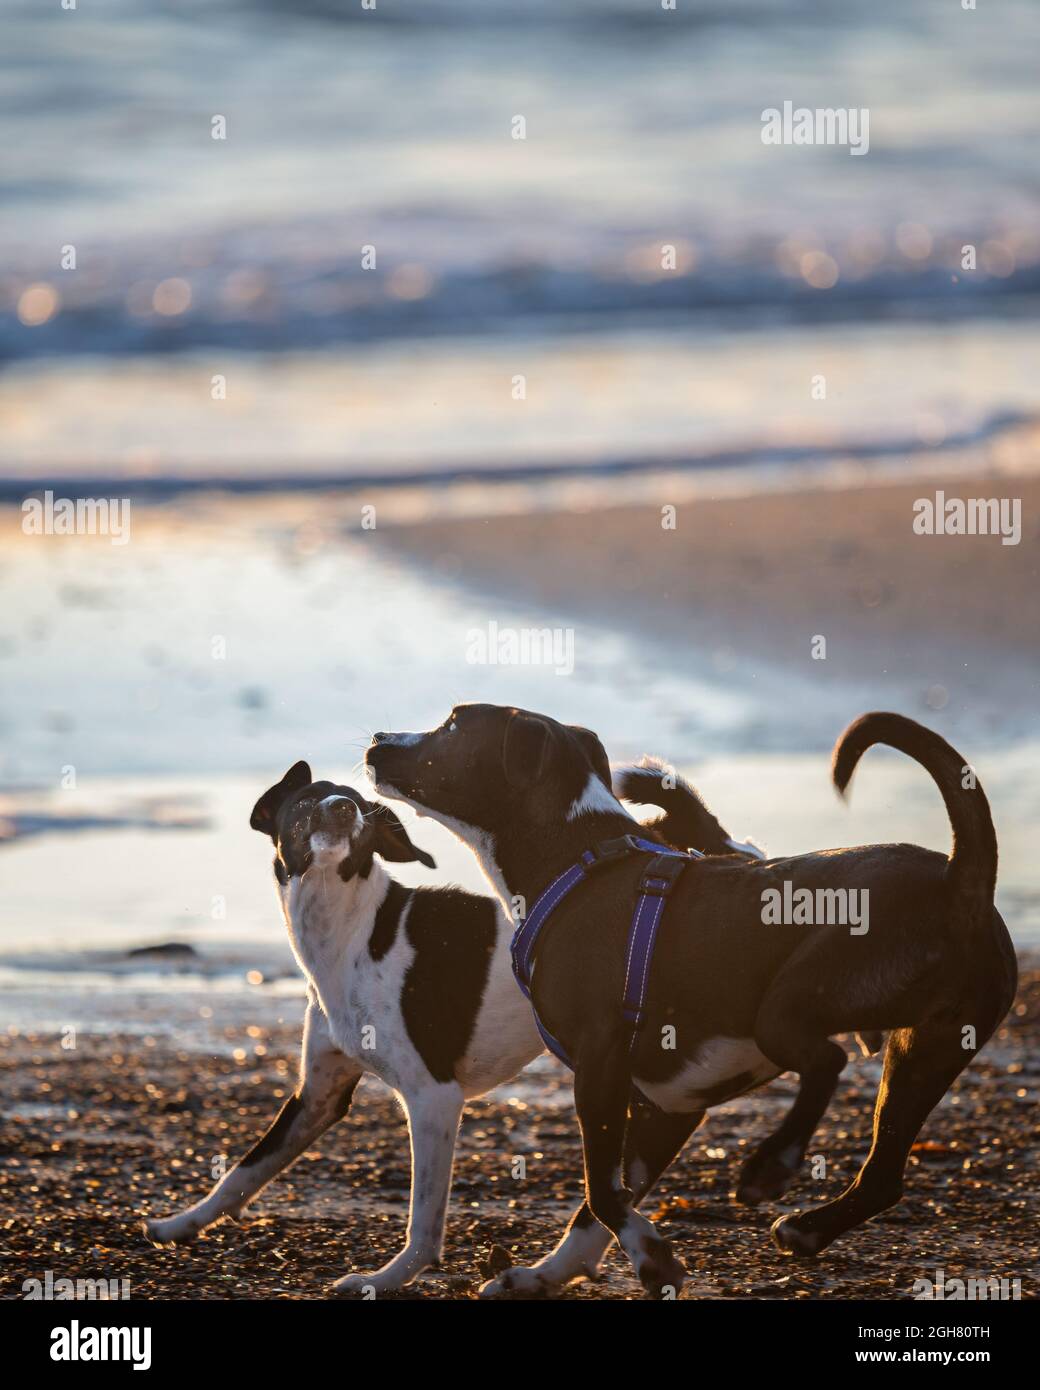 Two dogs playing on the beach at sunrise, back lit by the morning sun. Vertical format. Stock Photo